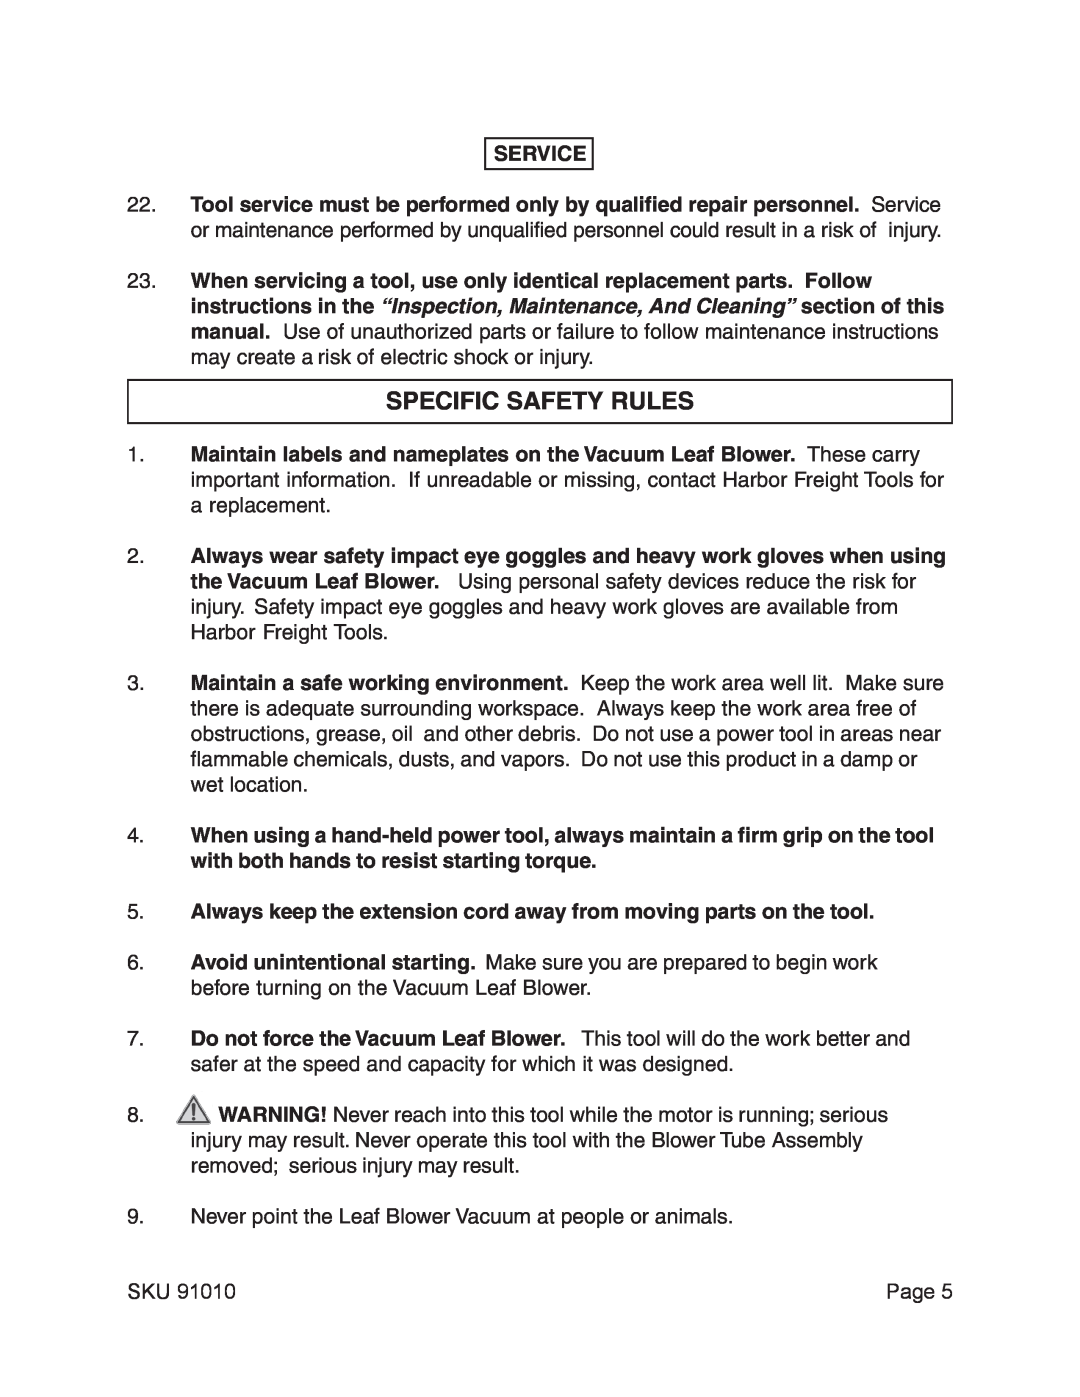 Harbor Freight Tools 91010 operating instructions Specific Safety Rules, Service, Page 